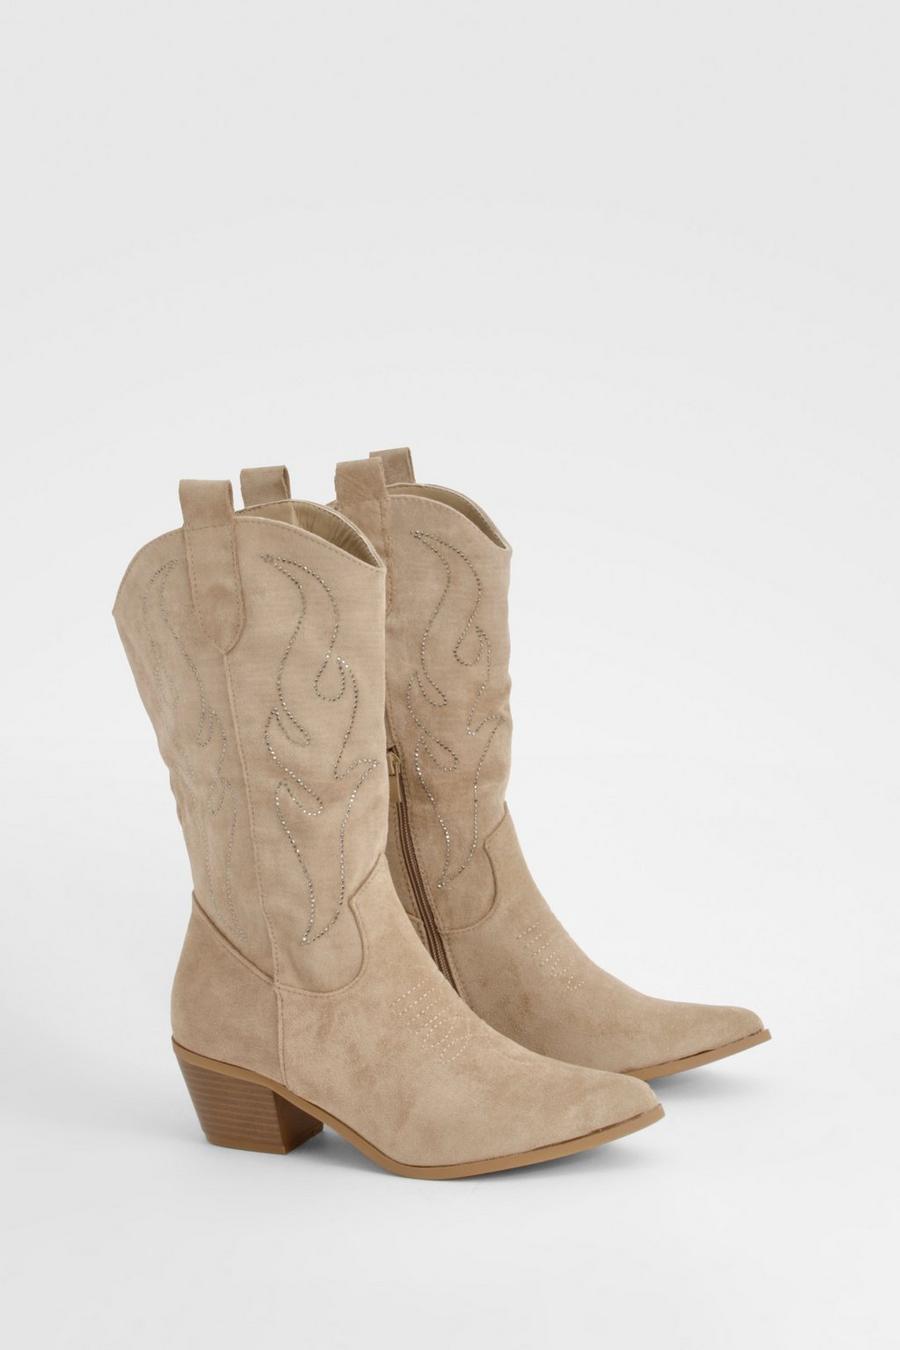 Camel Embroidered Stud Knee High Western Boots   